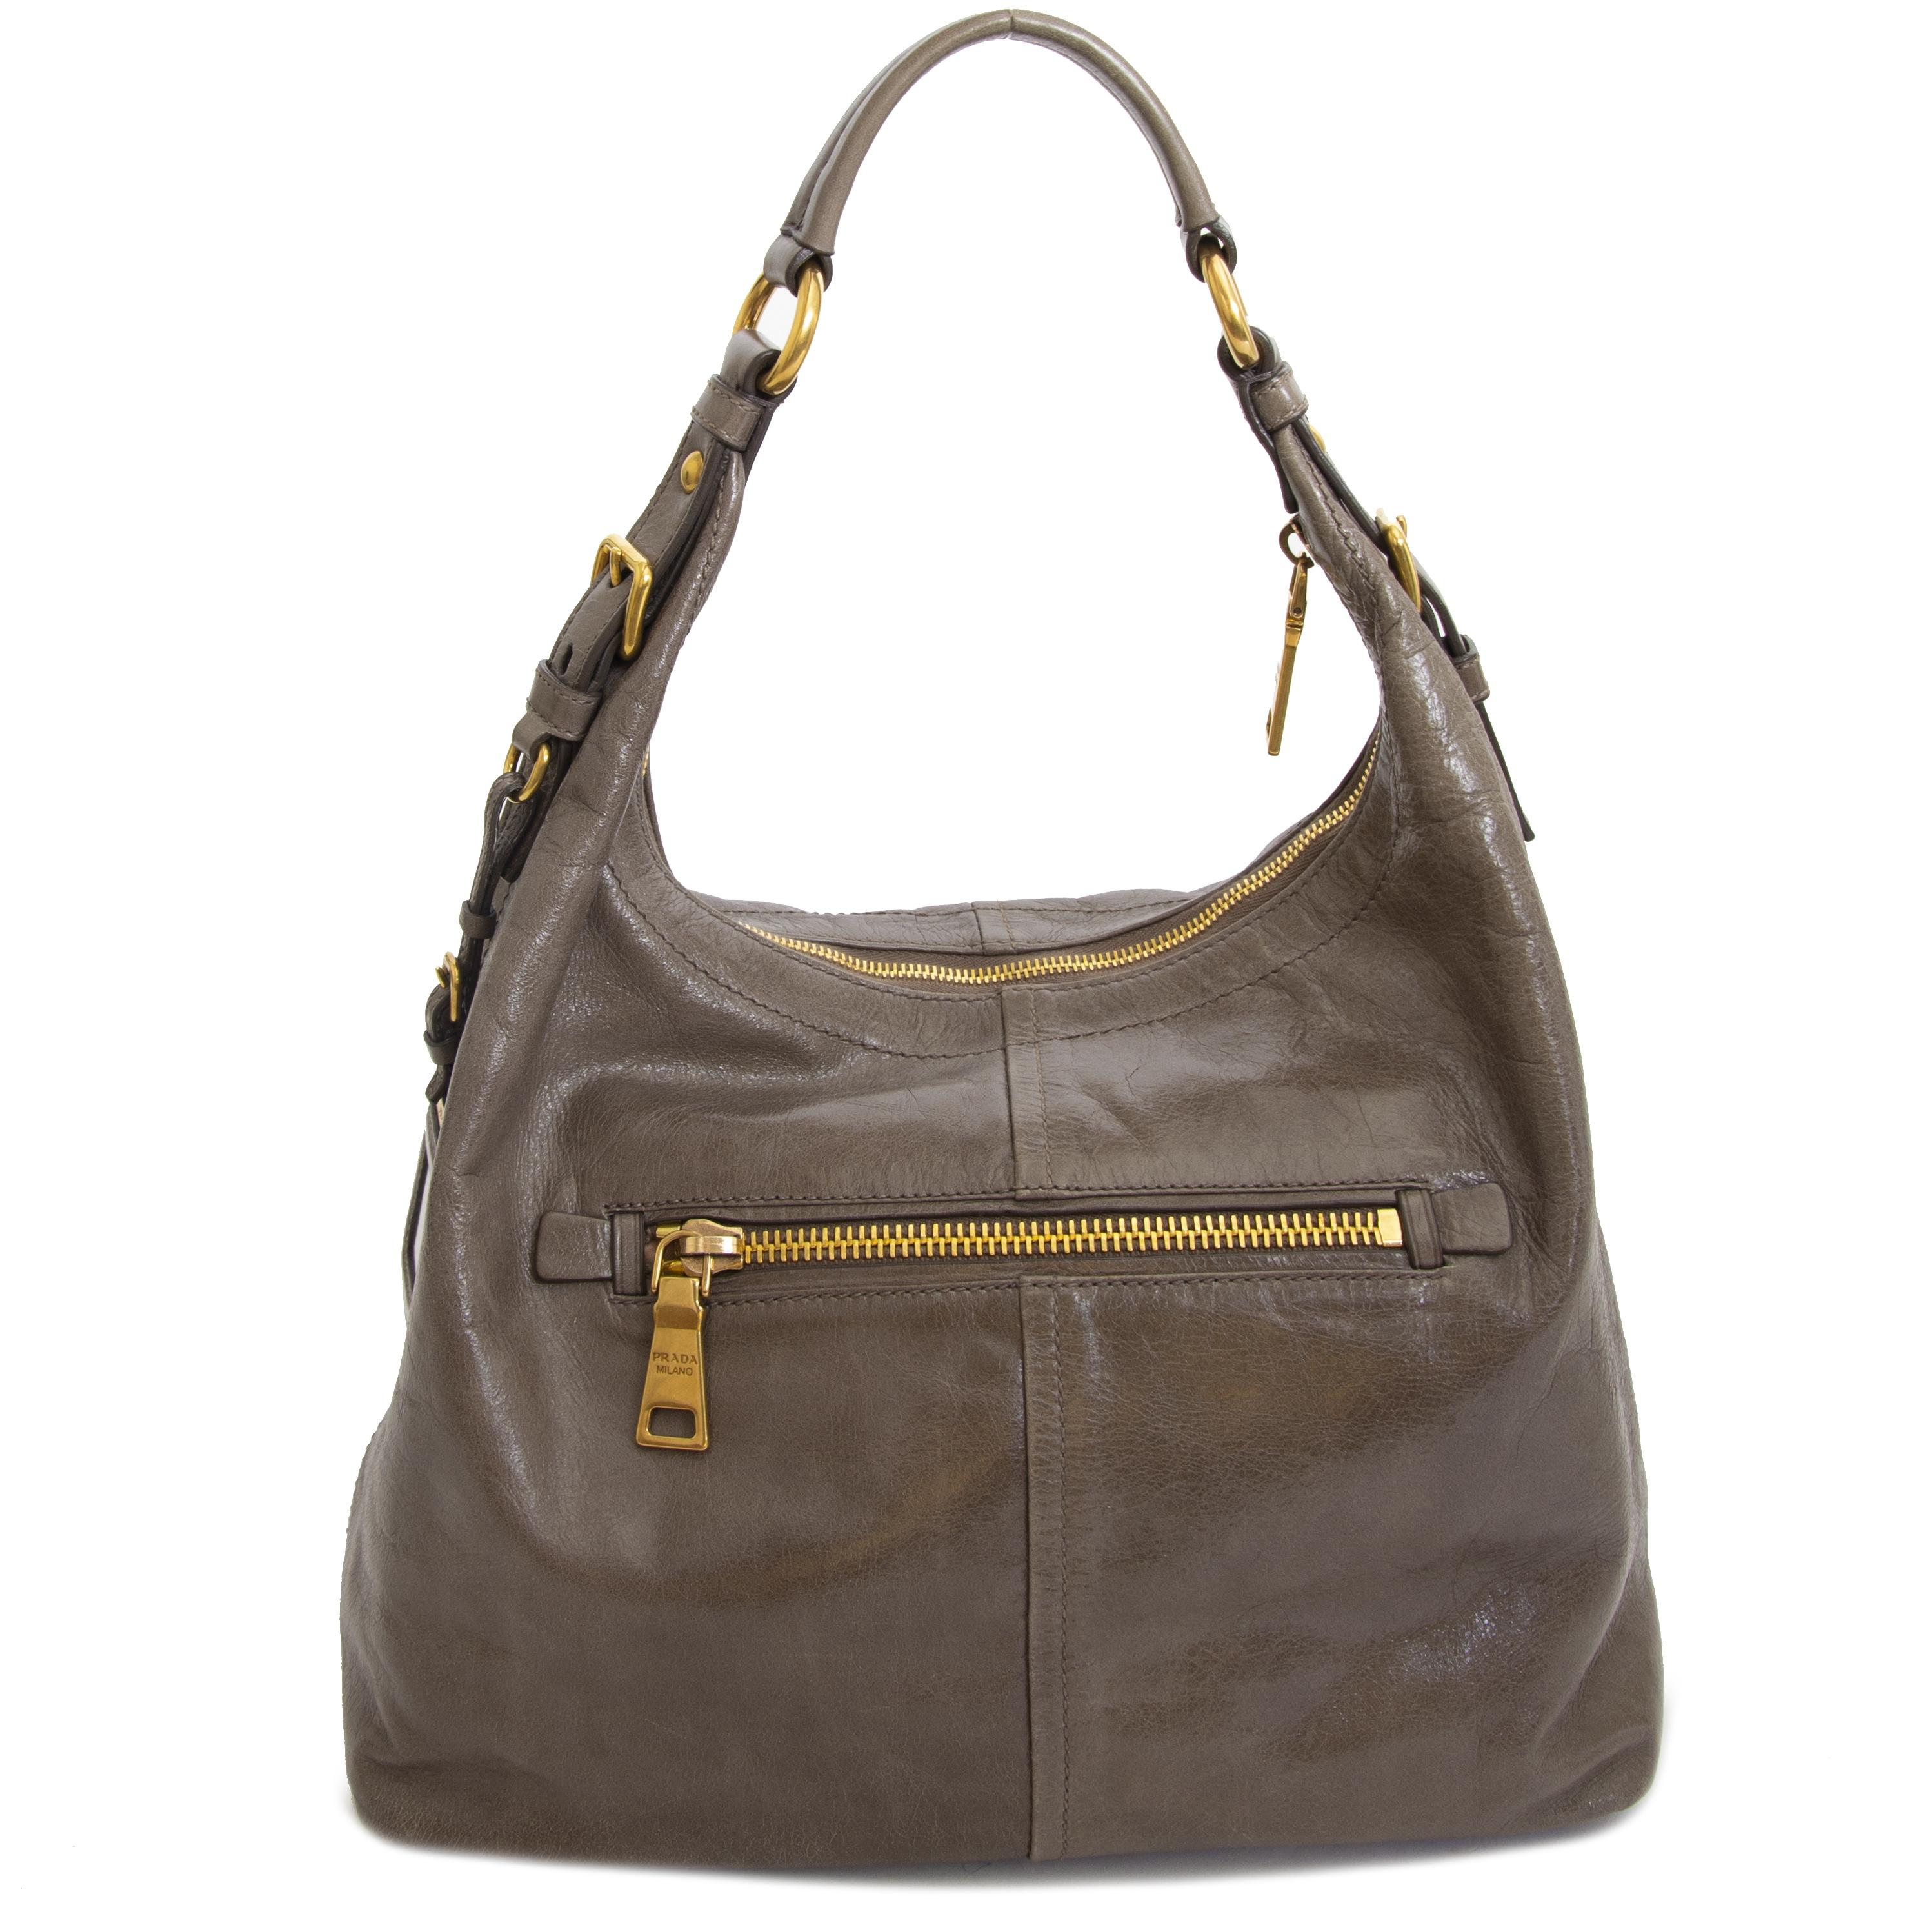 Very good condition

Prada Taupe Shoulder Bag

This beautiful Prada bag is crafted in taupe leather and features gold-toned hardware.
The bag has a zipper pocket in the front and the back, and another pocket with push button in the front.
The main